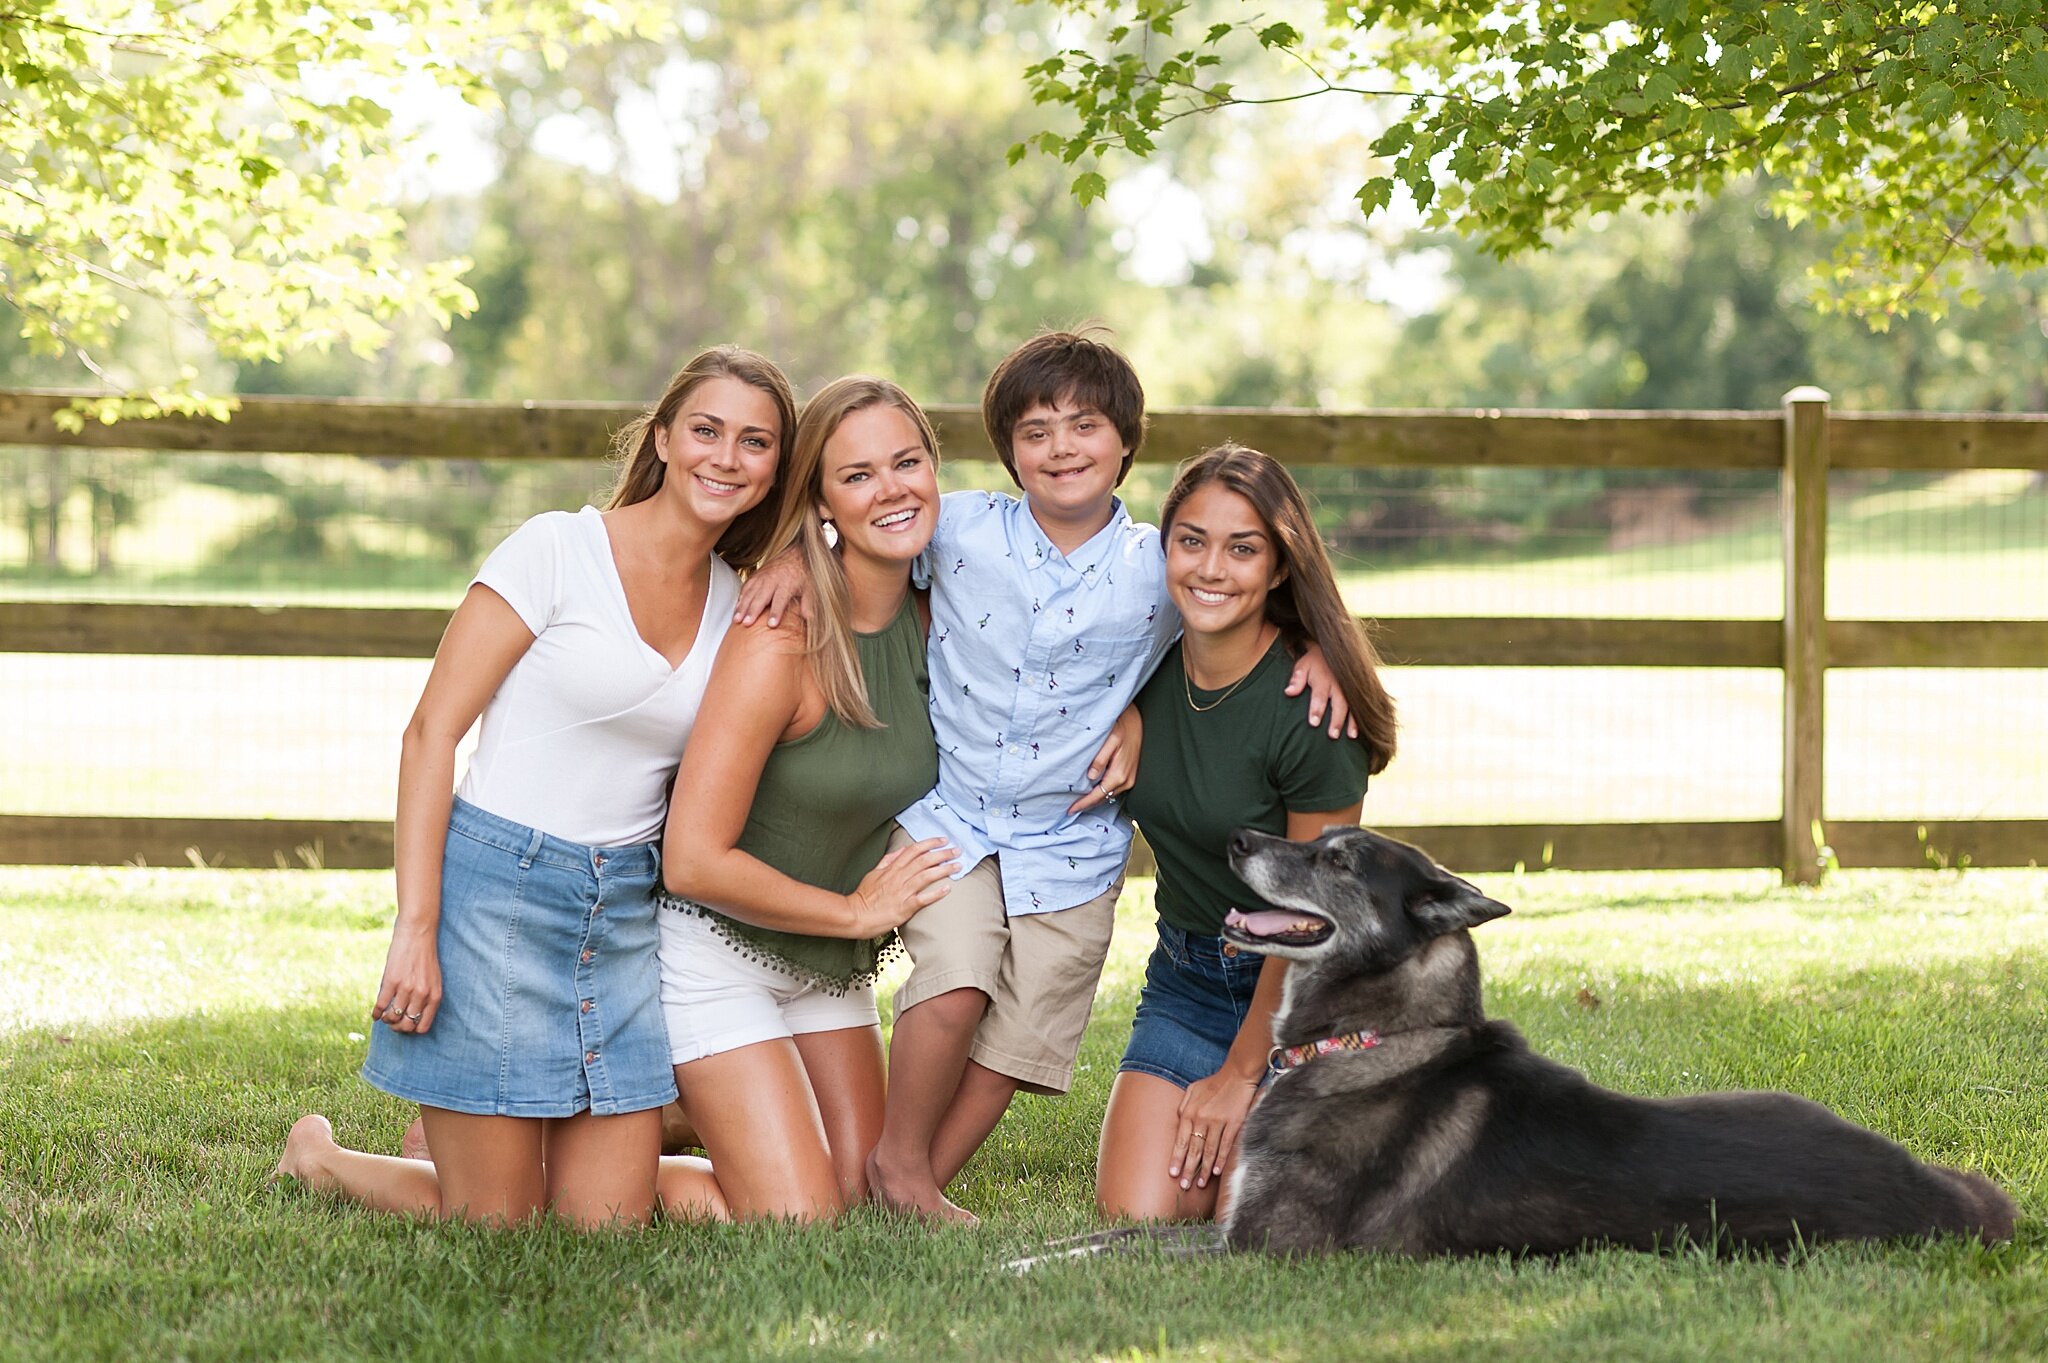 Wendy Zook Photography | Frederick MD family photographer, MD family photographer, Frederick family photographer, Maryland family photographer, Celebrate the Special Photo Sessions, Down Syndrome awareness, Frederick MD Down Syndrome Awareness photographer